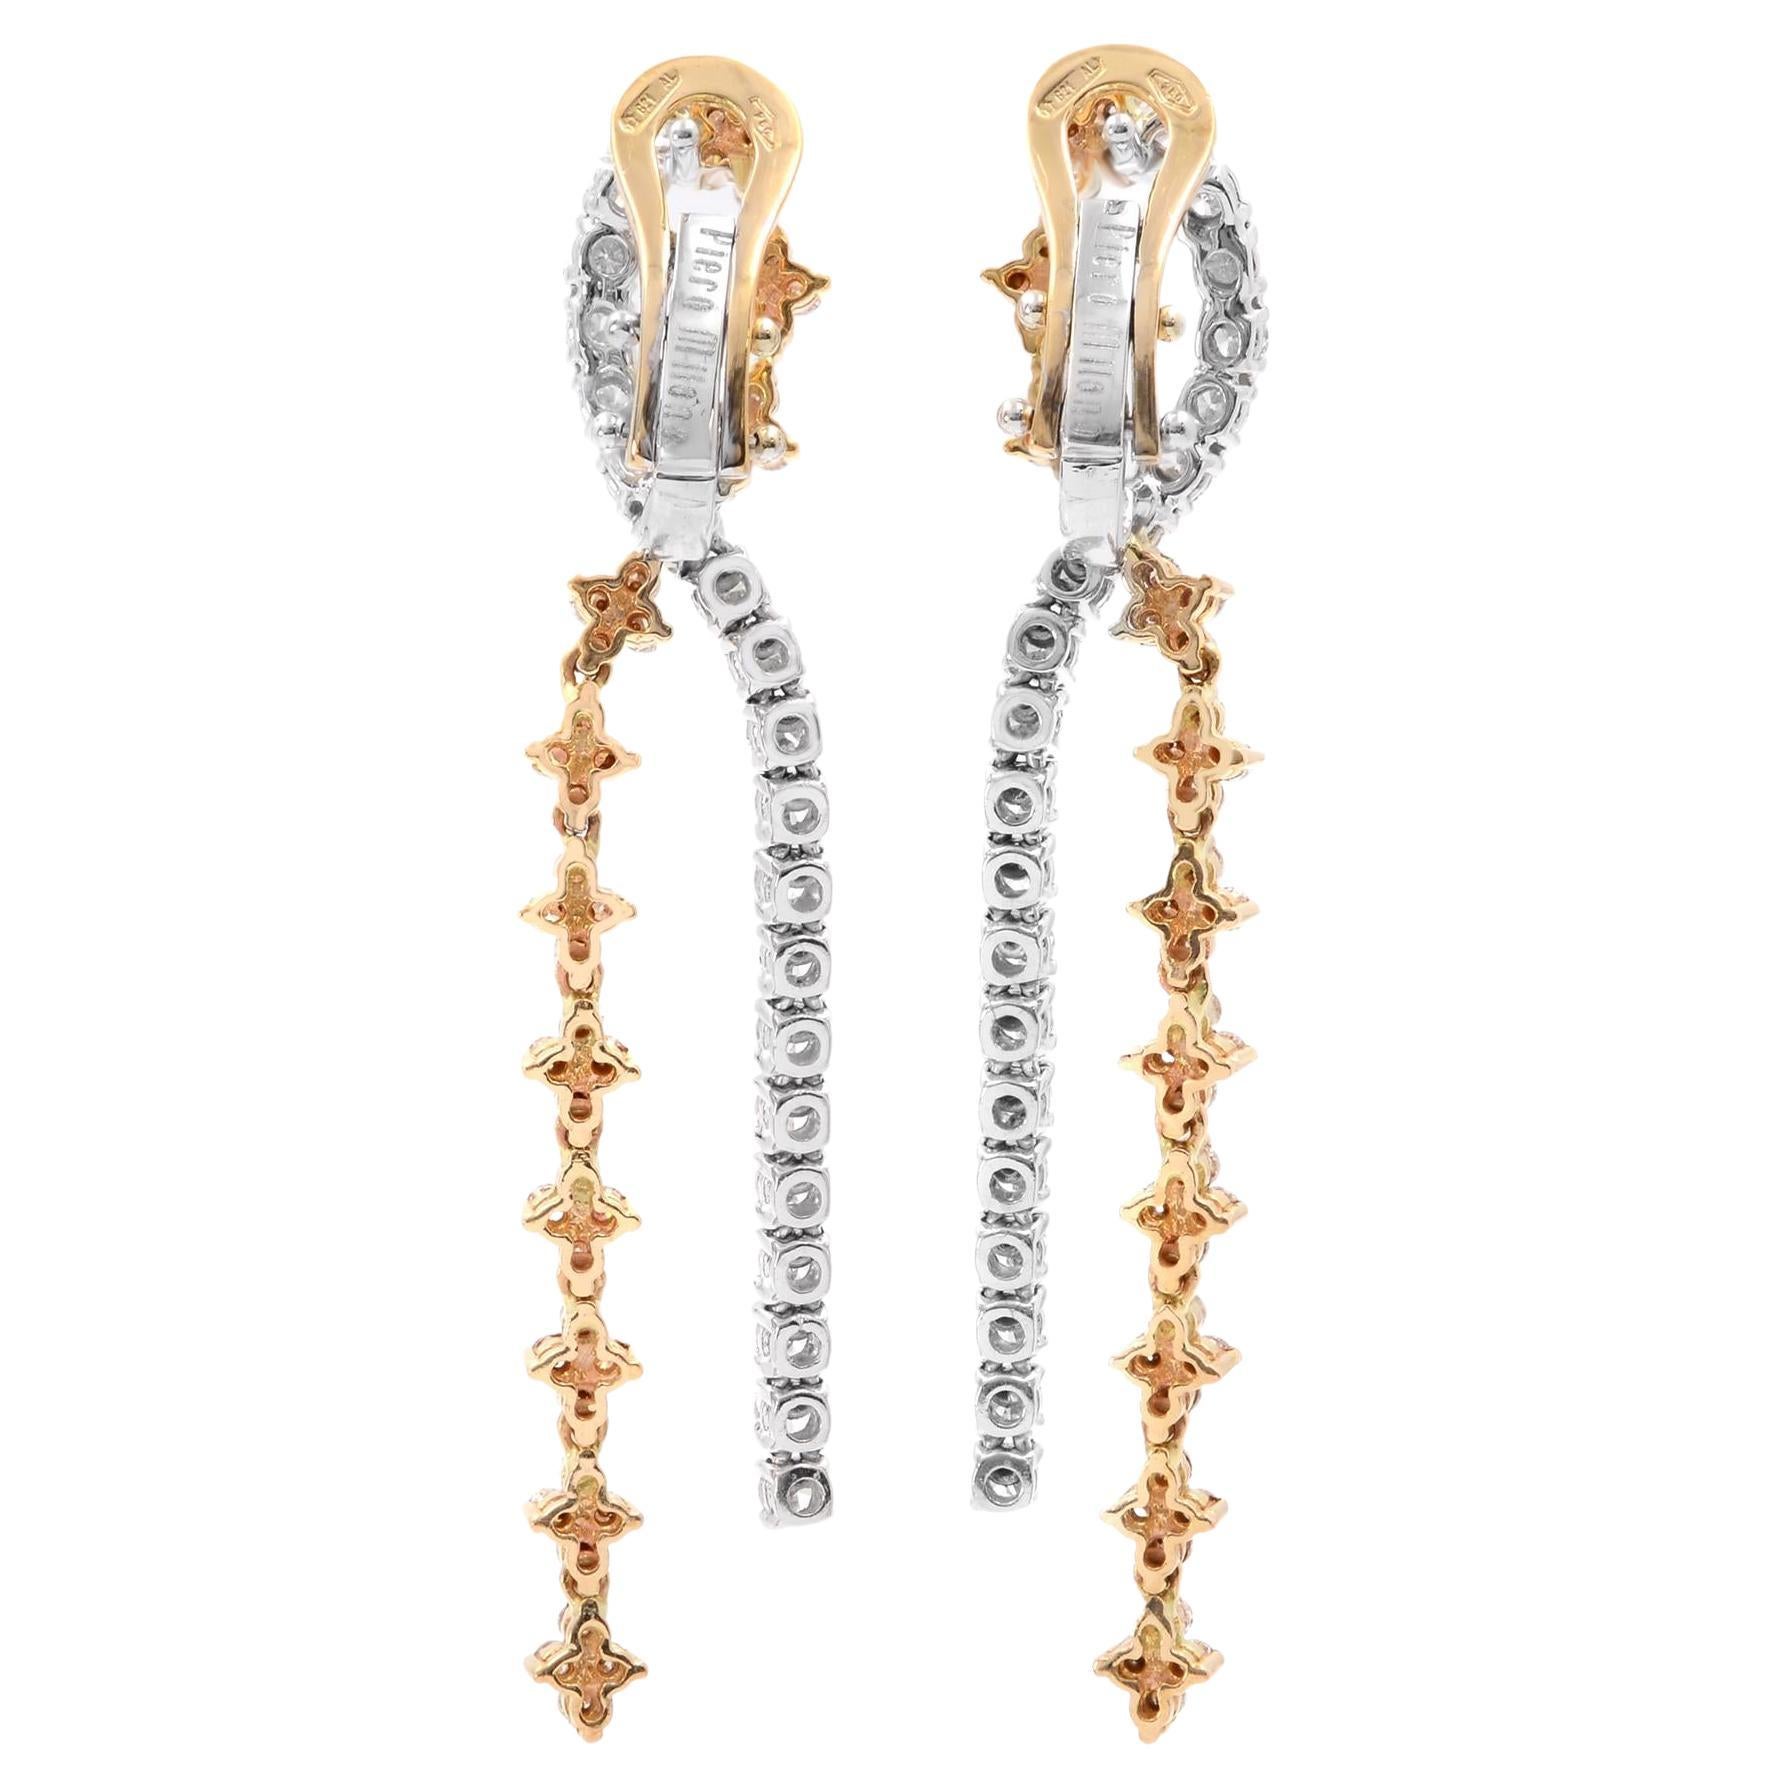 Natural diamond double row drop earrings in 18K white and rose gold. This elegant pair of earrings designed by Piero Milano features two Long Rows of diamond. Total carat weight 2.26cttw. Diamond color G-H  and VS-SI clarity. Weights 10.30 grams.